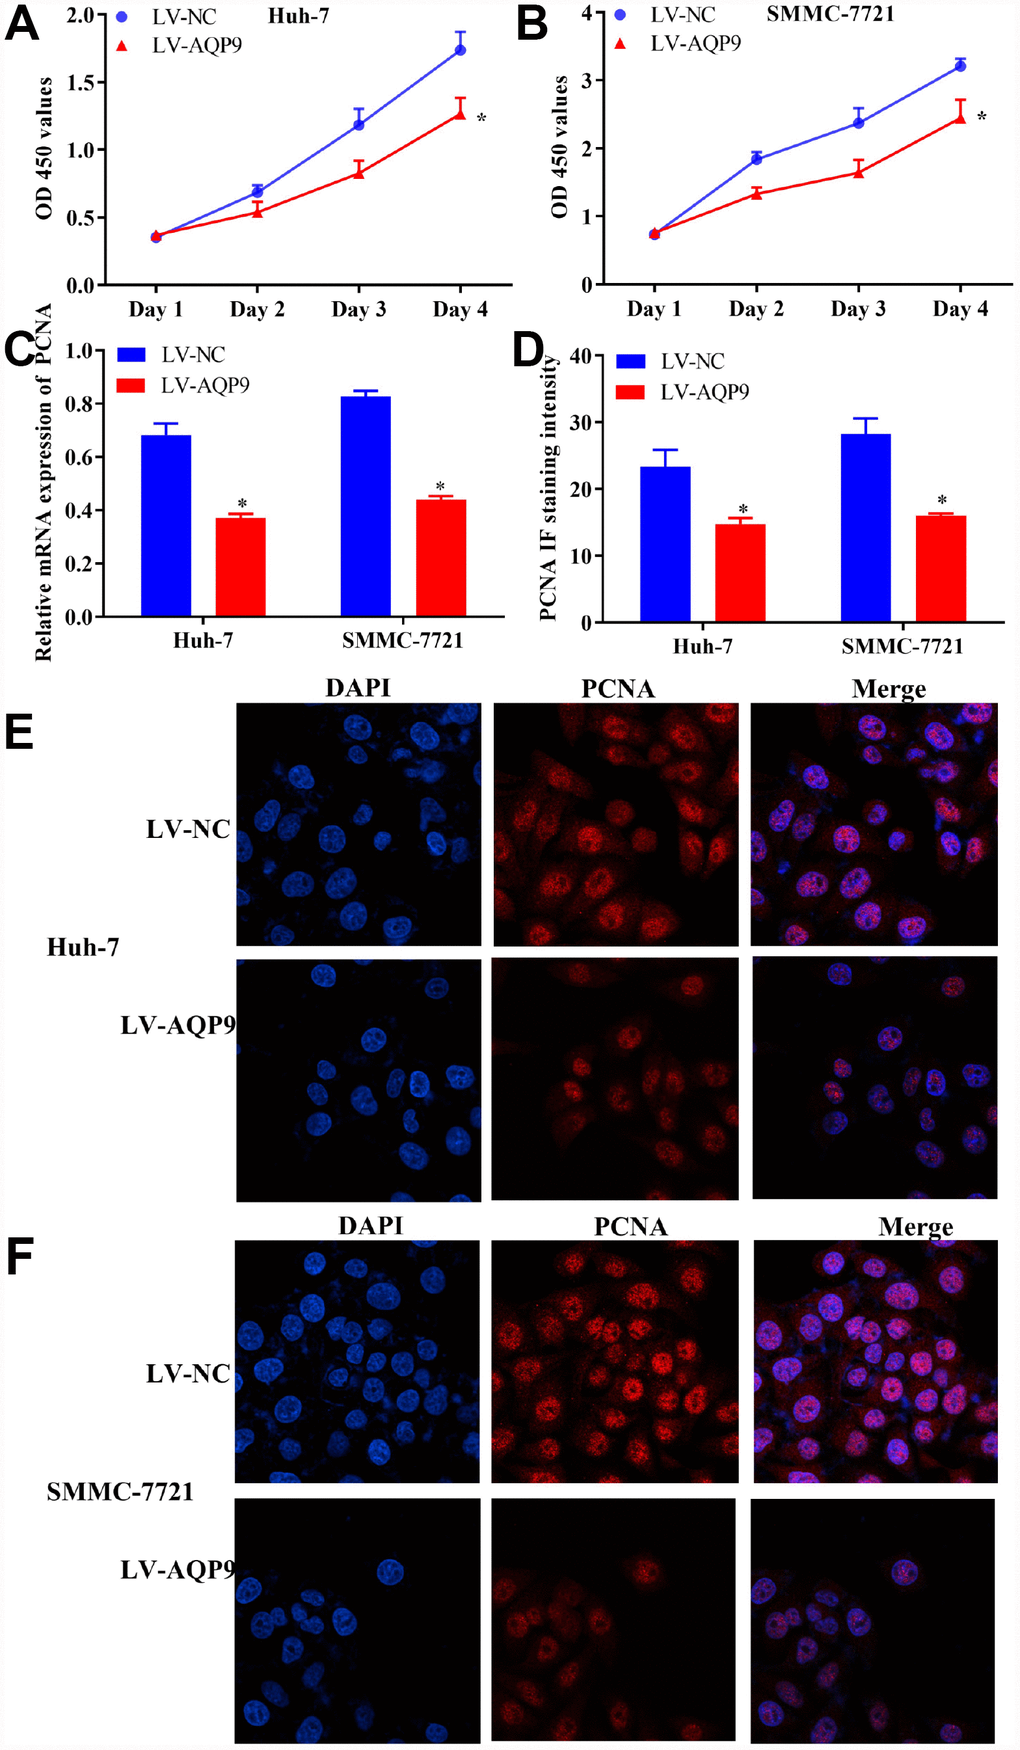 Overexpression of AQP9 inhibited proliferation of HCC cells. (A and B) The proliferative activity of Huh-7 and SMMC-7721 cells transfected with LV-AQP9 was determined by CCK-8 assay compared with the control. (C) The expression levels of PCNA in HCC cells were examined following the transfection with LV-NC or LV-AQP9. (D–F) The expression of PCNA in Huh-7 and SMMC-7721 cells transfected with LV-NC or LV-AQP9 were evaluated using immunocytochemistry analysis. The results were represented as mean ± SD. P